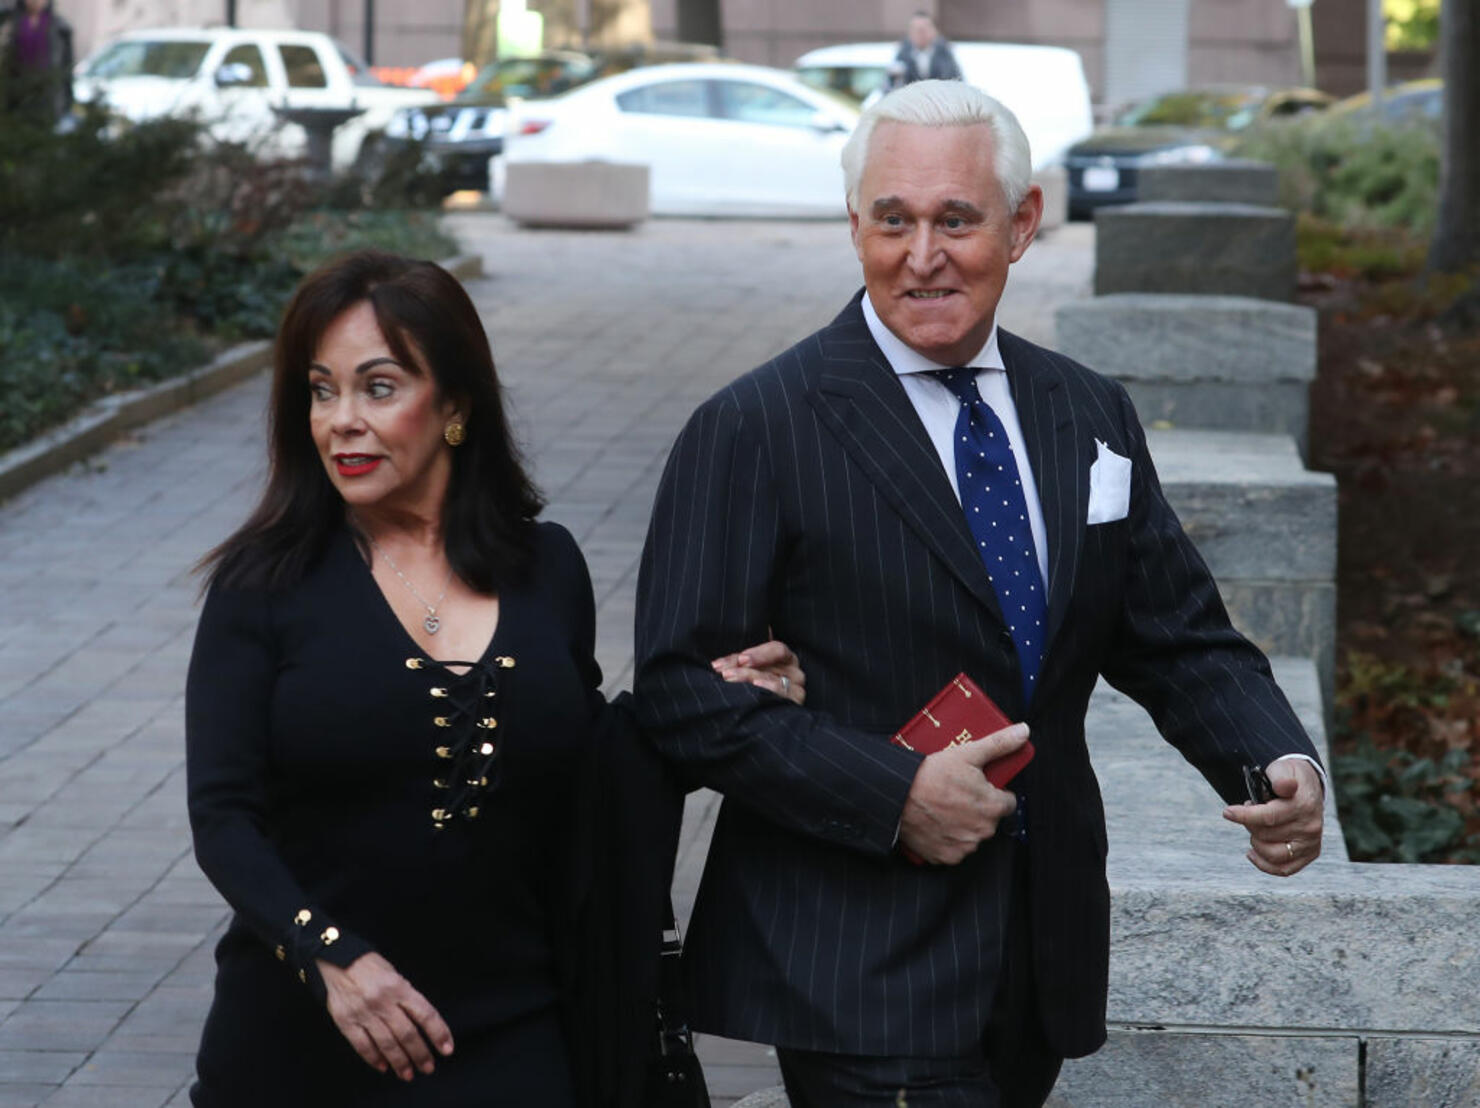 Jury Deliberates In Roger Stone Obstruction Trial